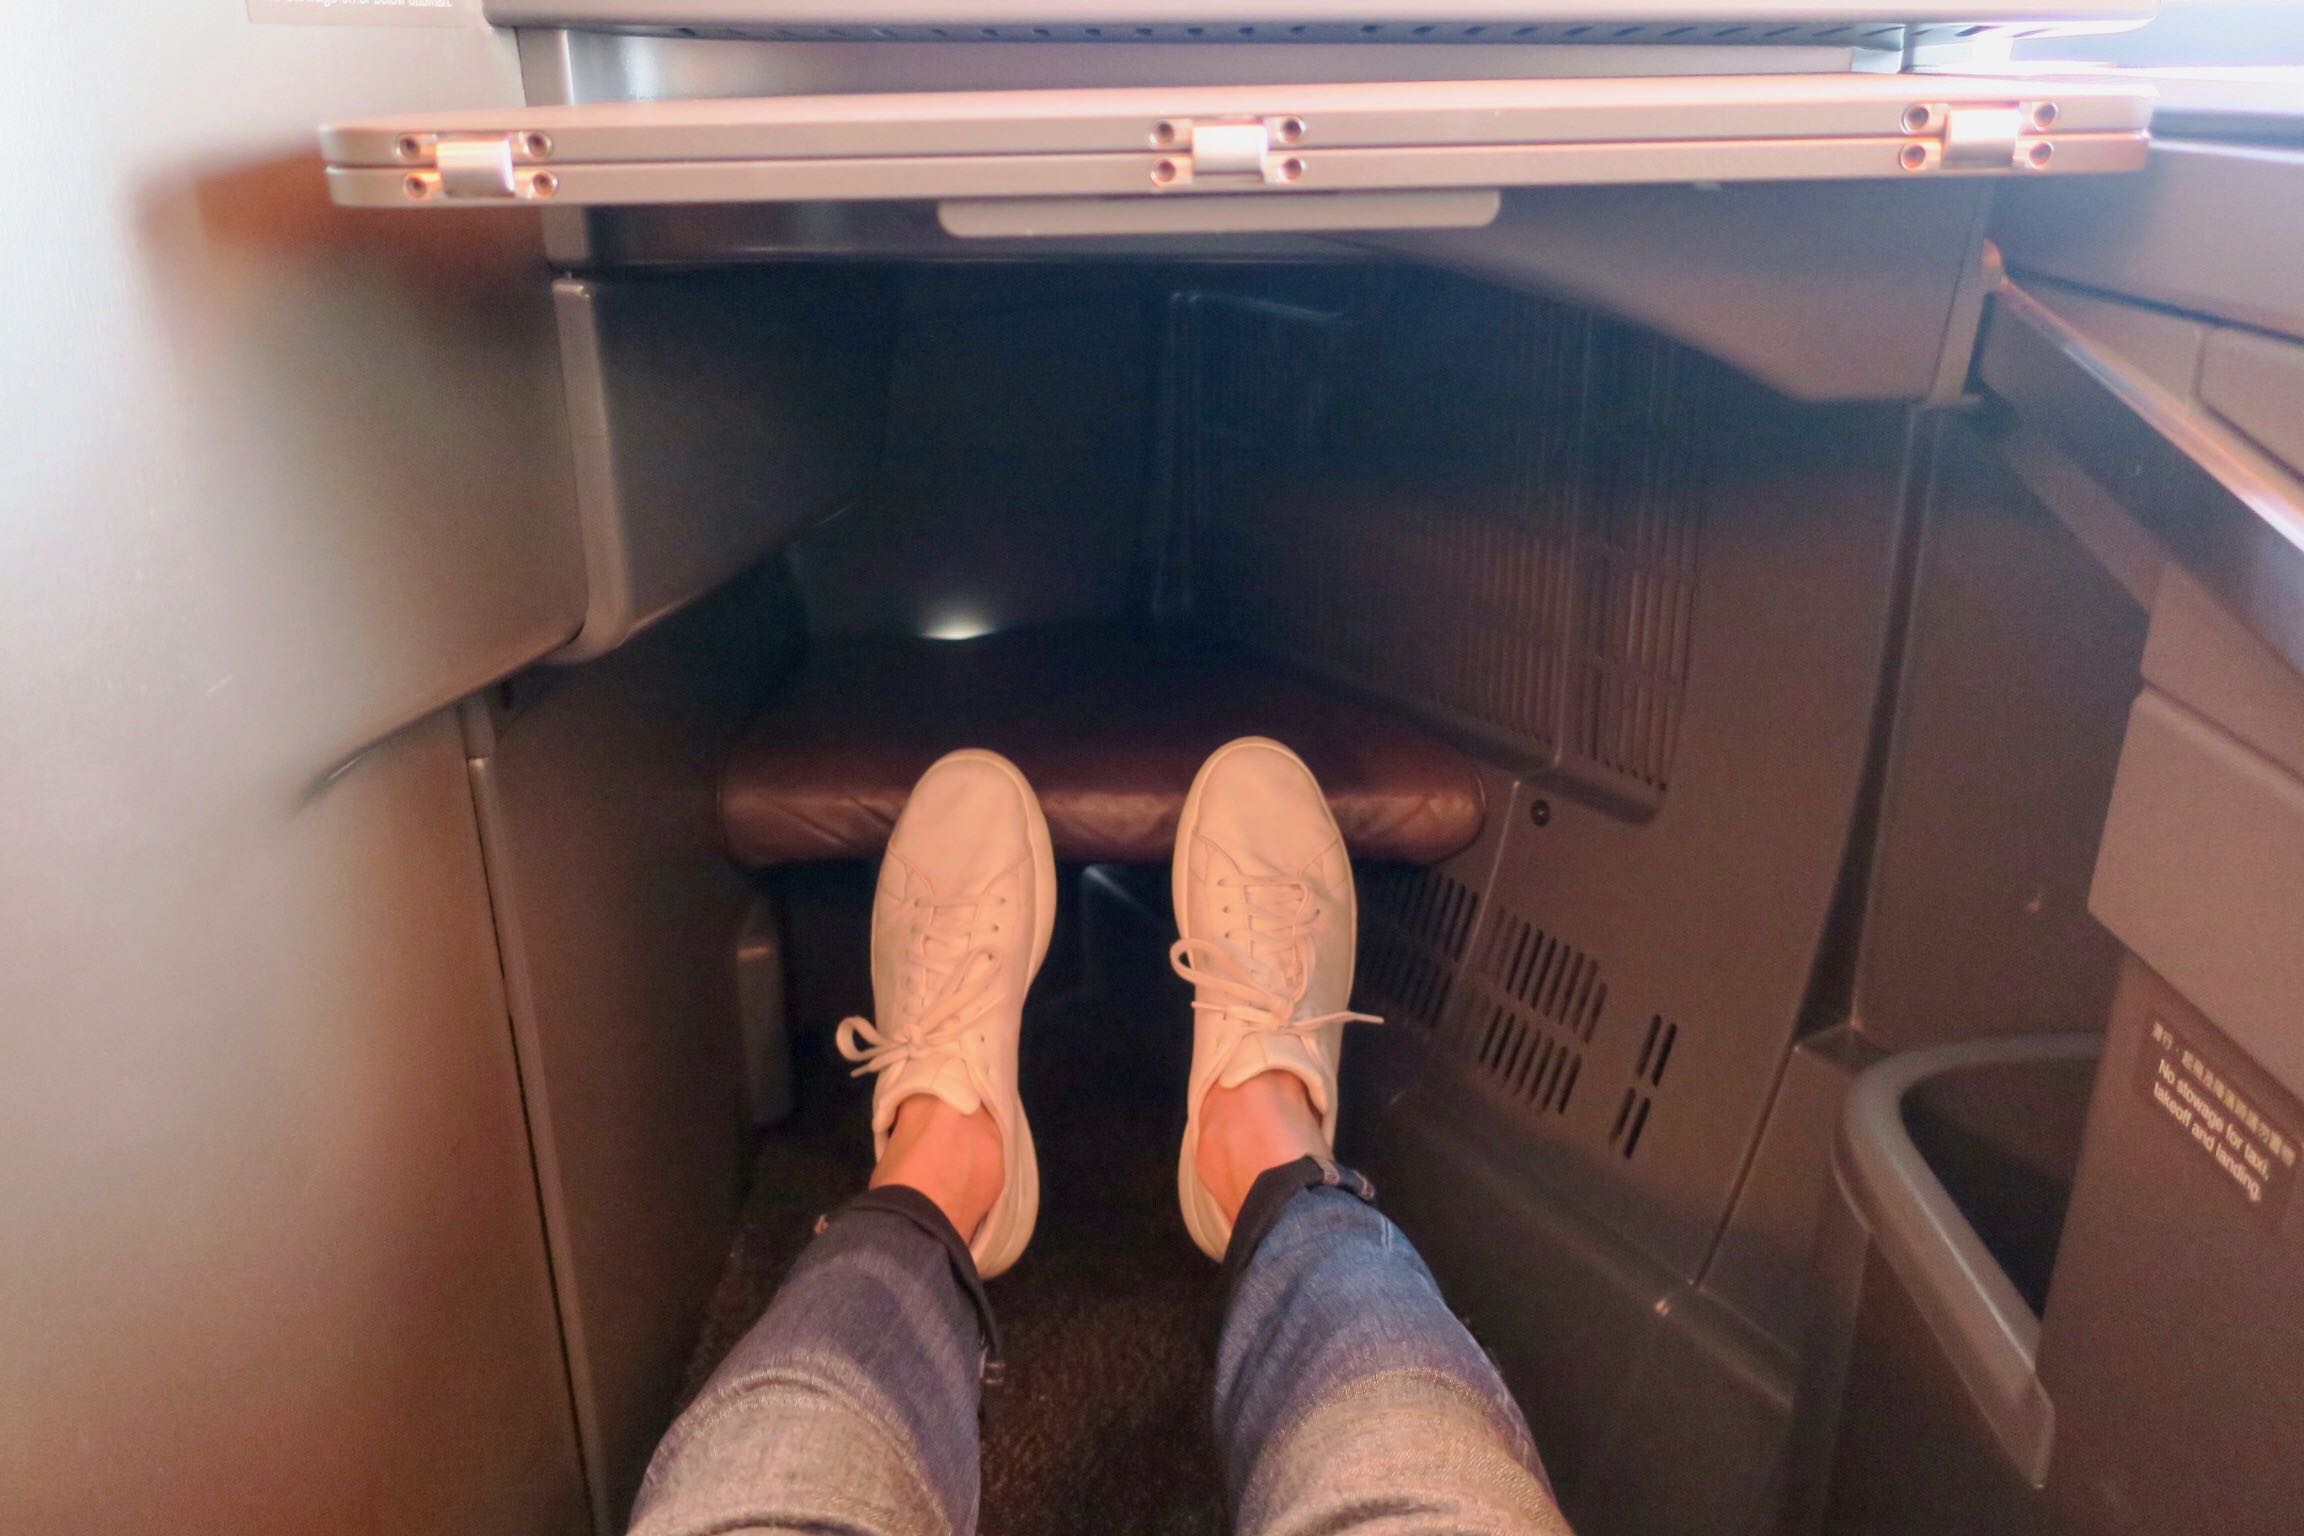 China Airlines Business Class footwell